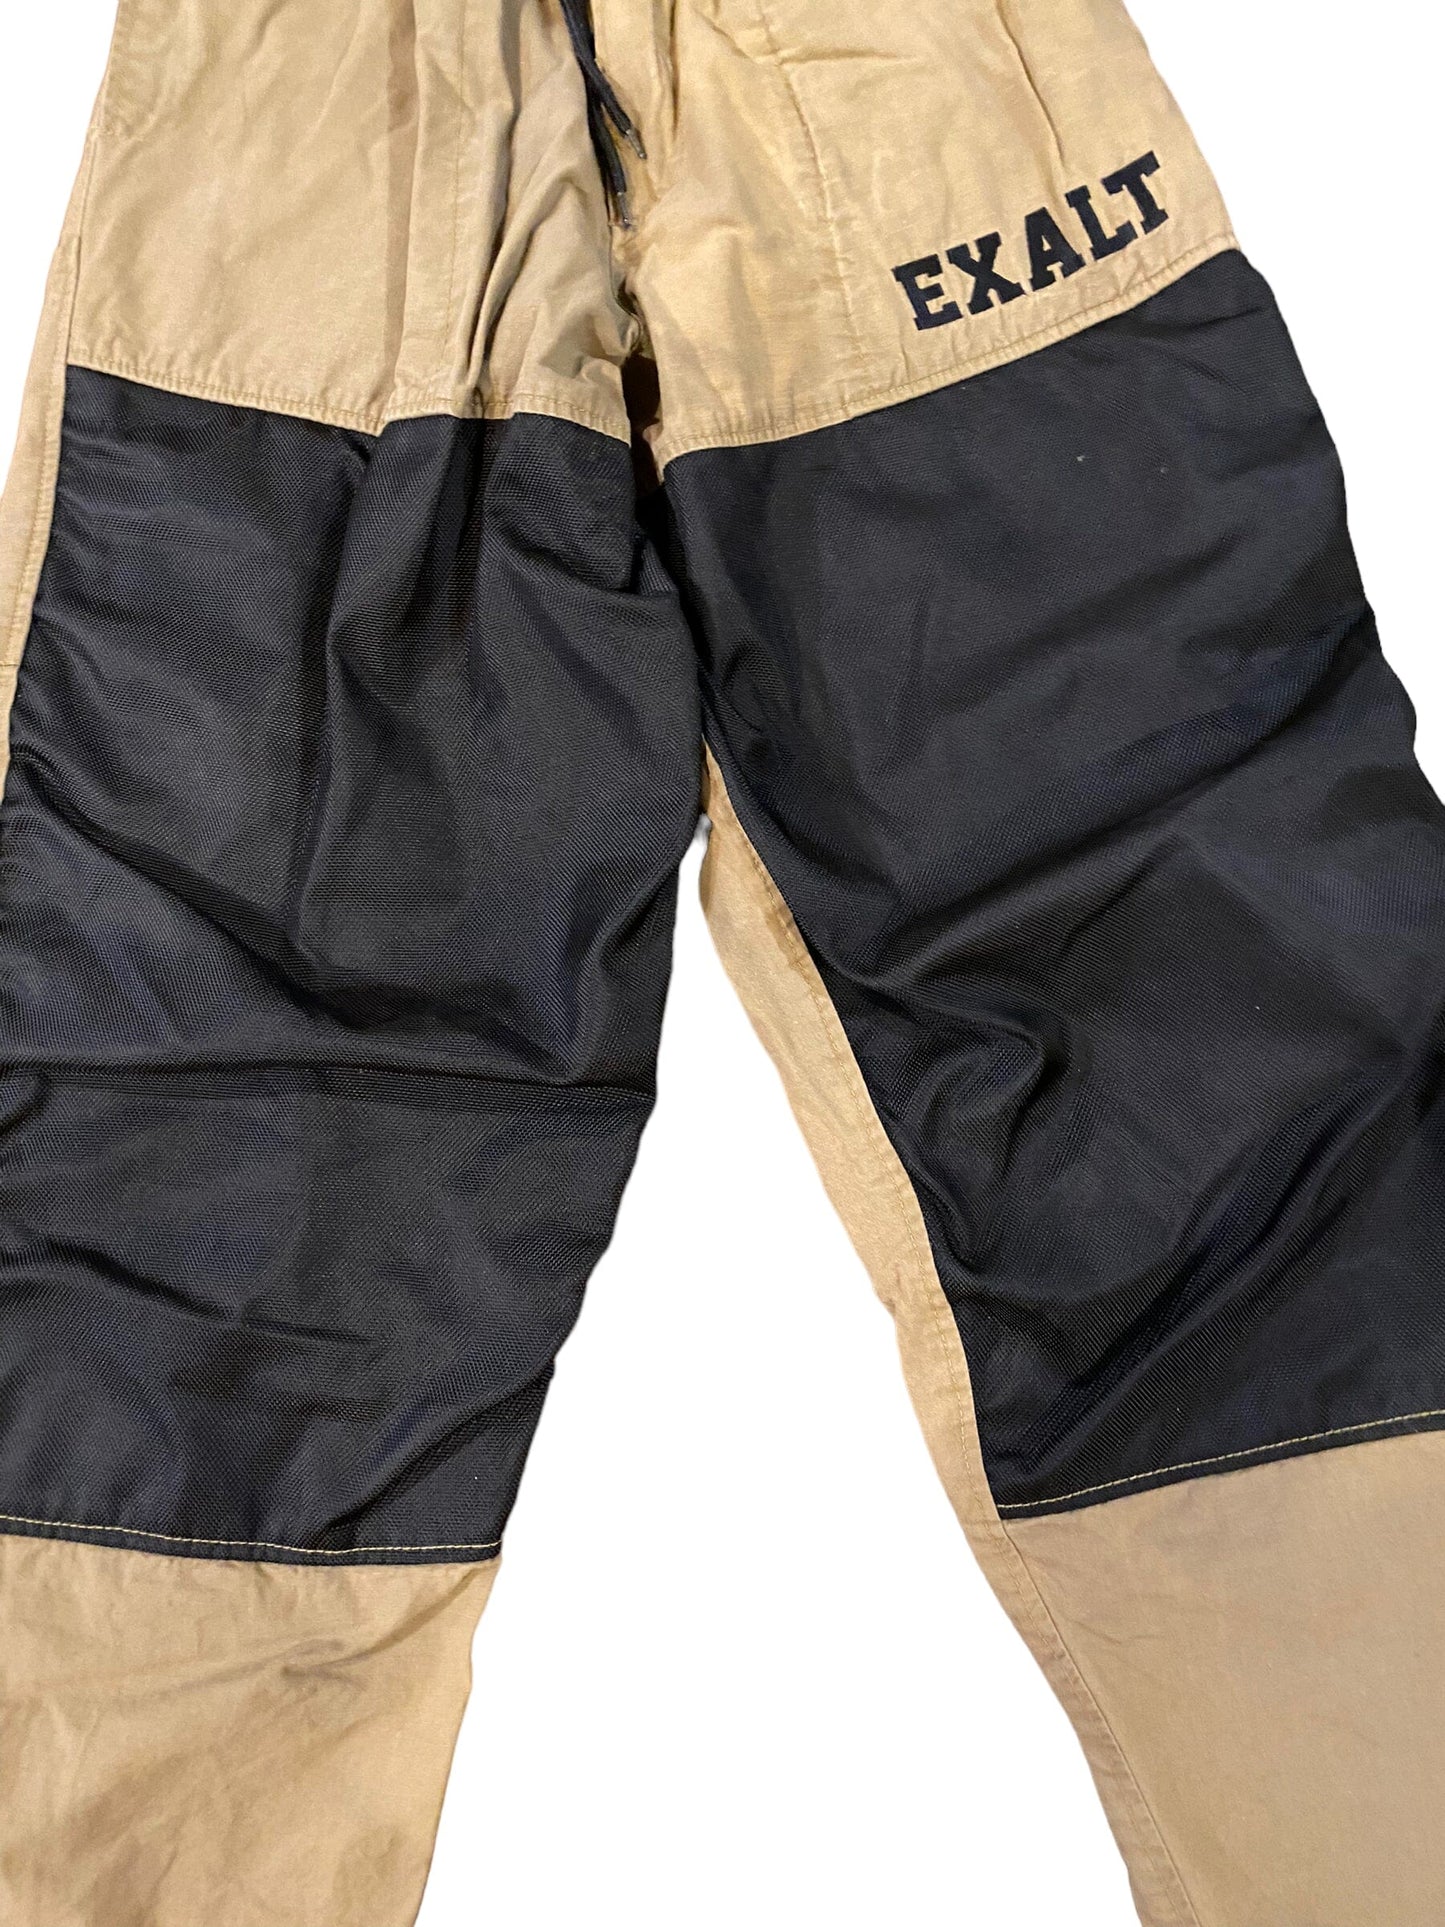 Used Exalt Throwback Paintball Pants -size M Paintball Gun from CPXBrosPaintball Buy/Sell/Trade Paintball Markers, Paintball Hoppers, Paintball Masks, and Hormesis Headbands